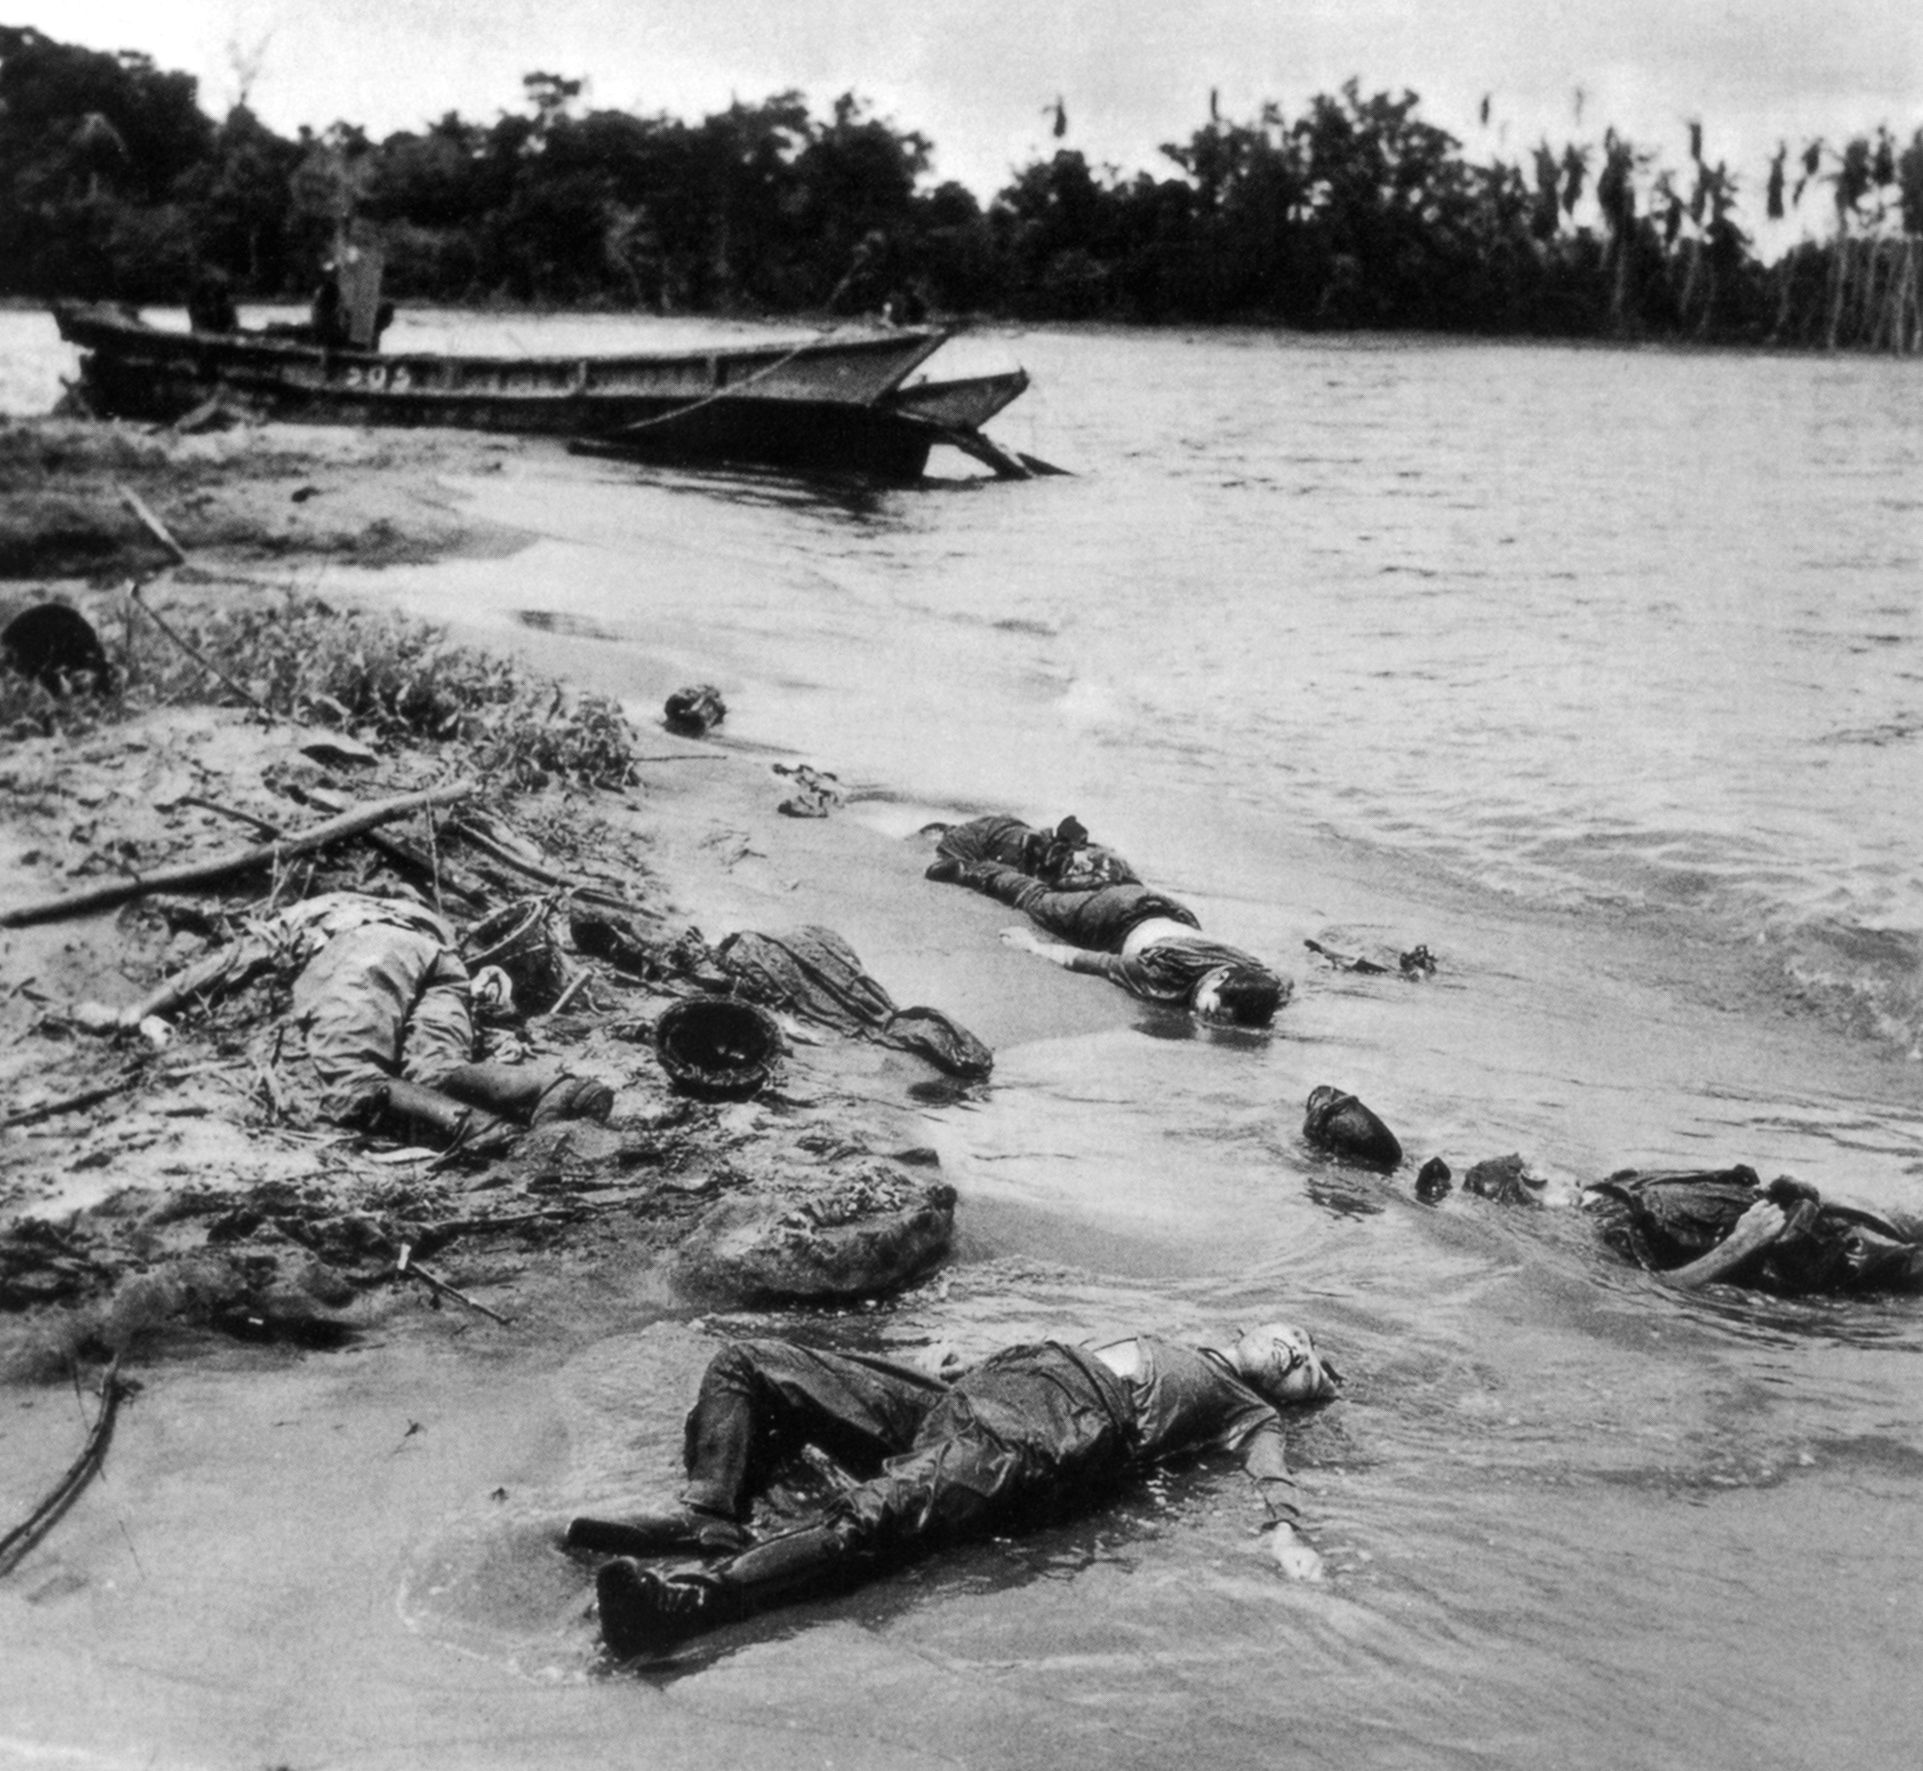 Japanese bodies lie unburied on the beach at Buna after an unsuccessful stand against an American assault.